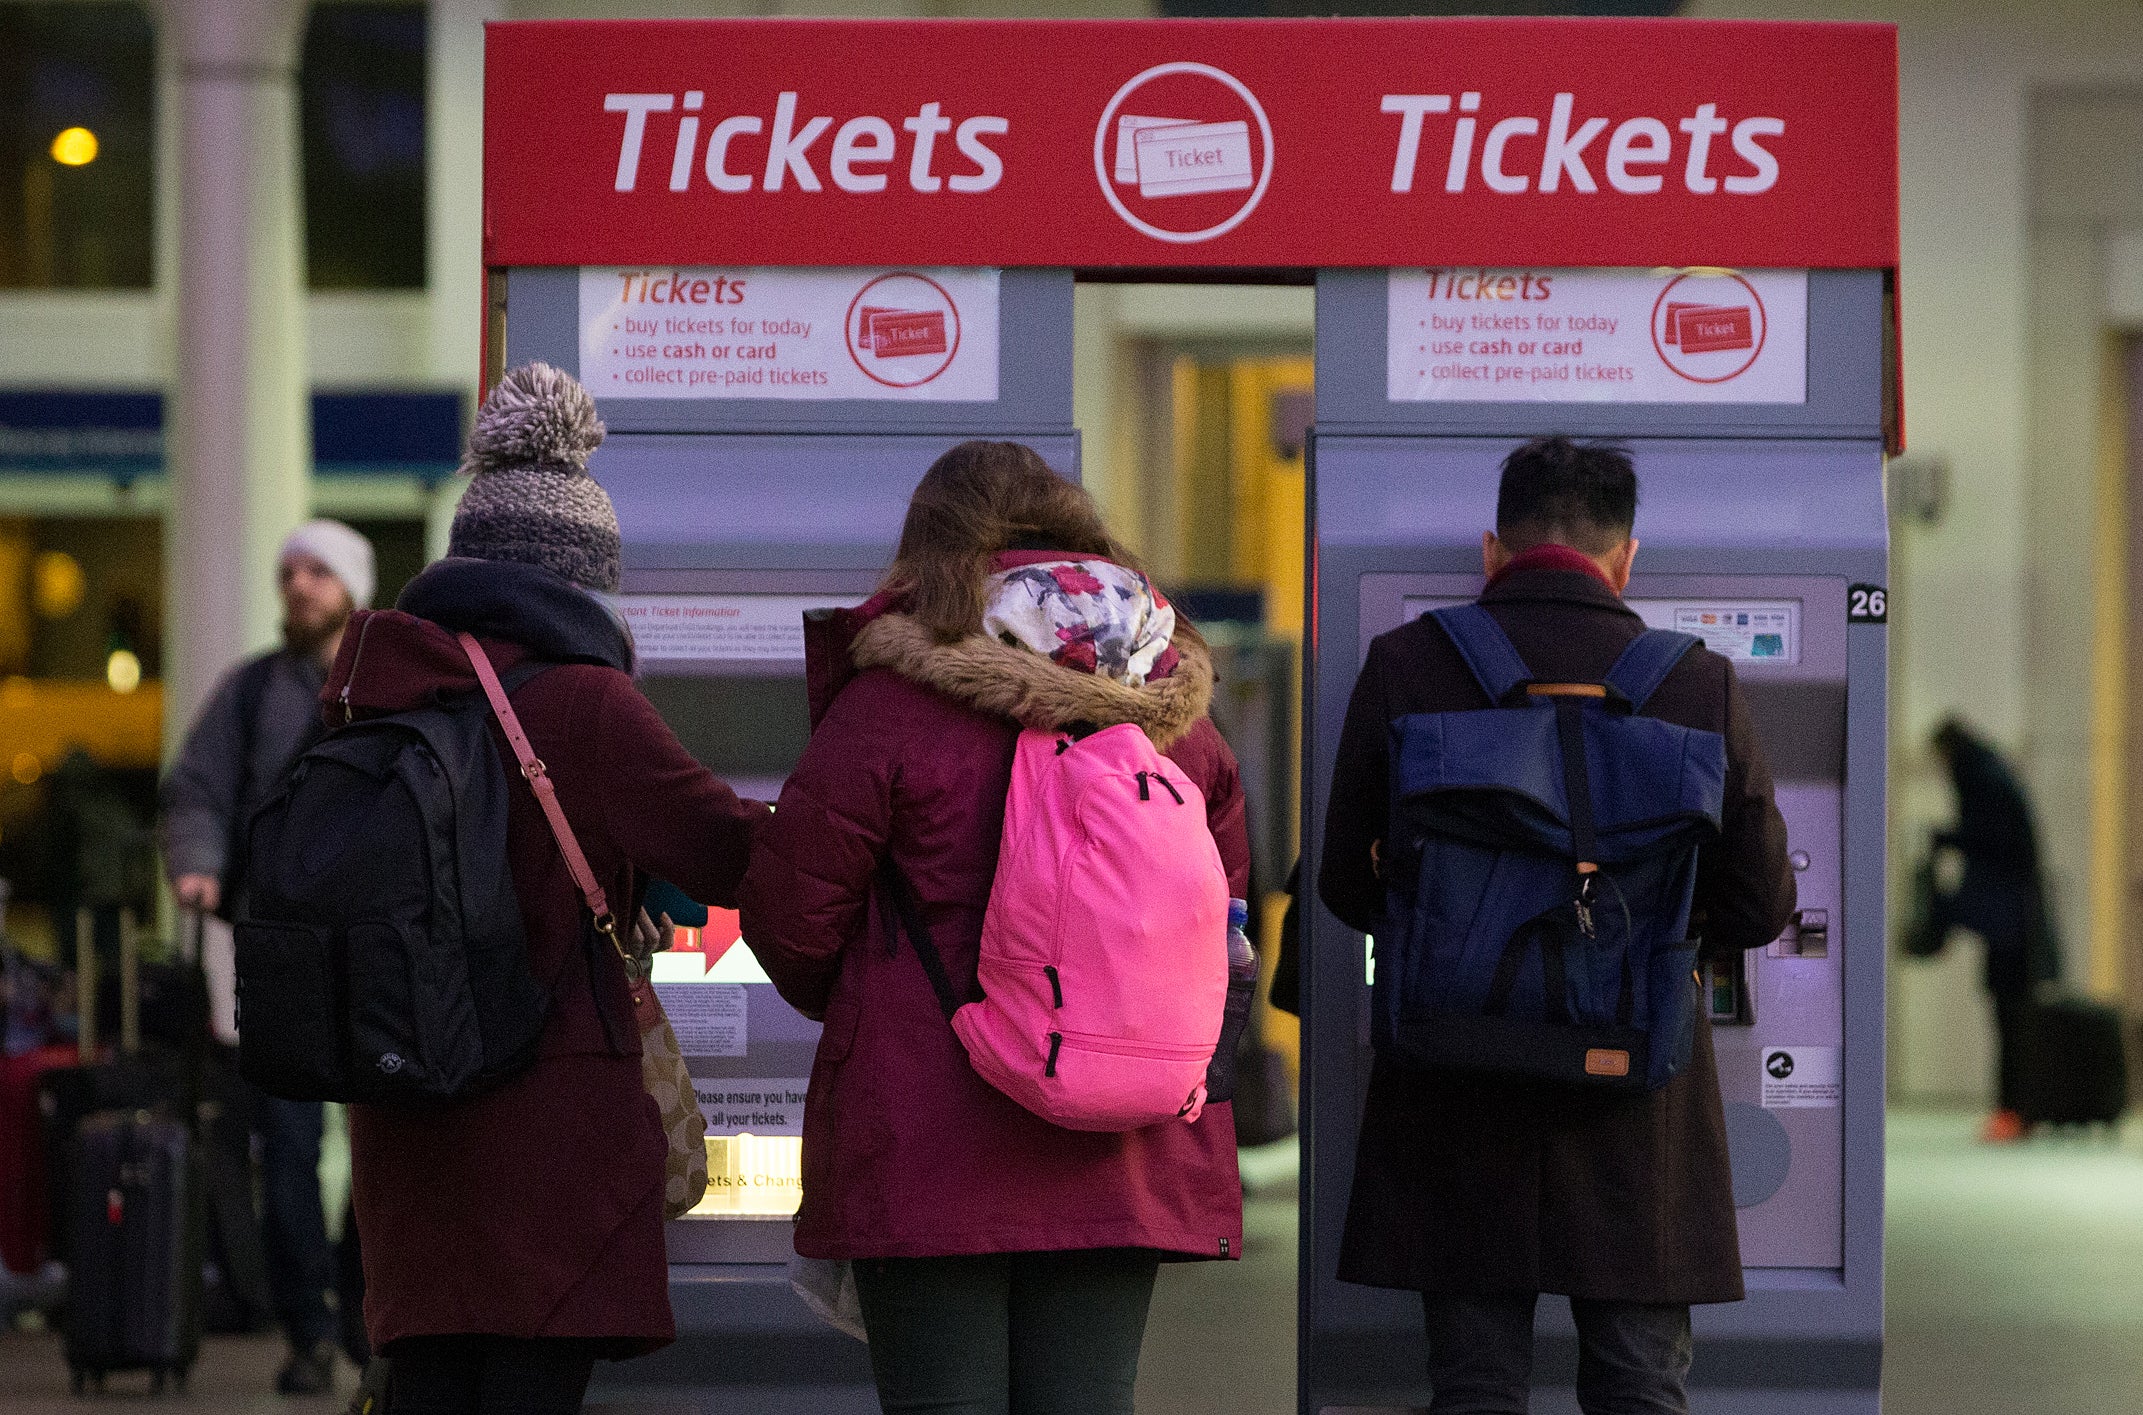 Ticket options offered by kiosks at train stations can be confusing